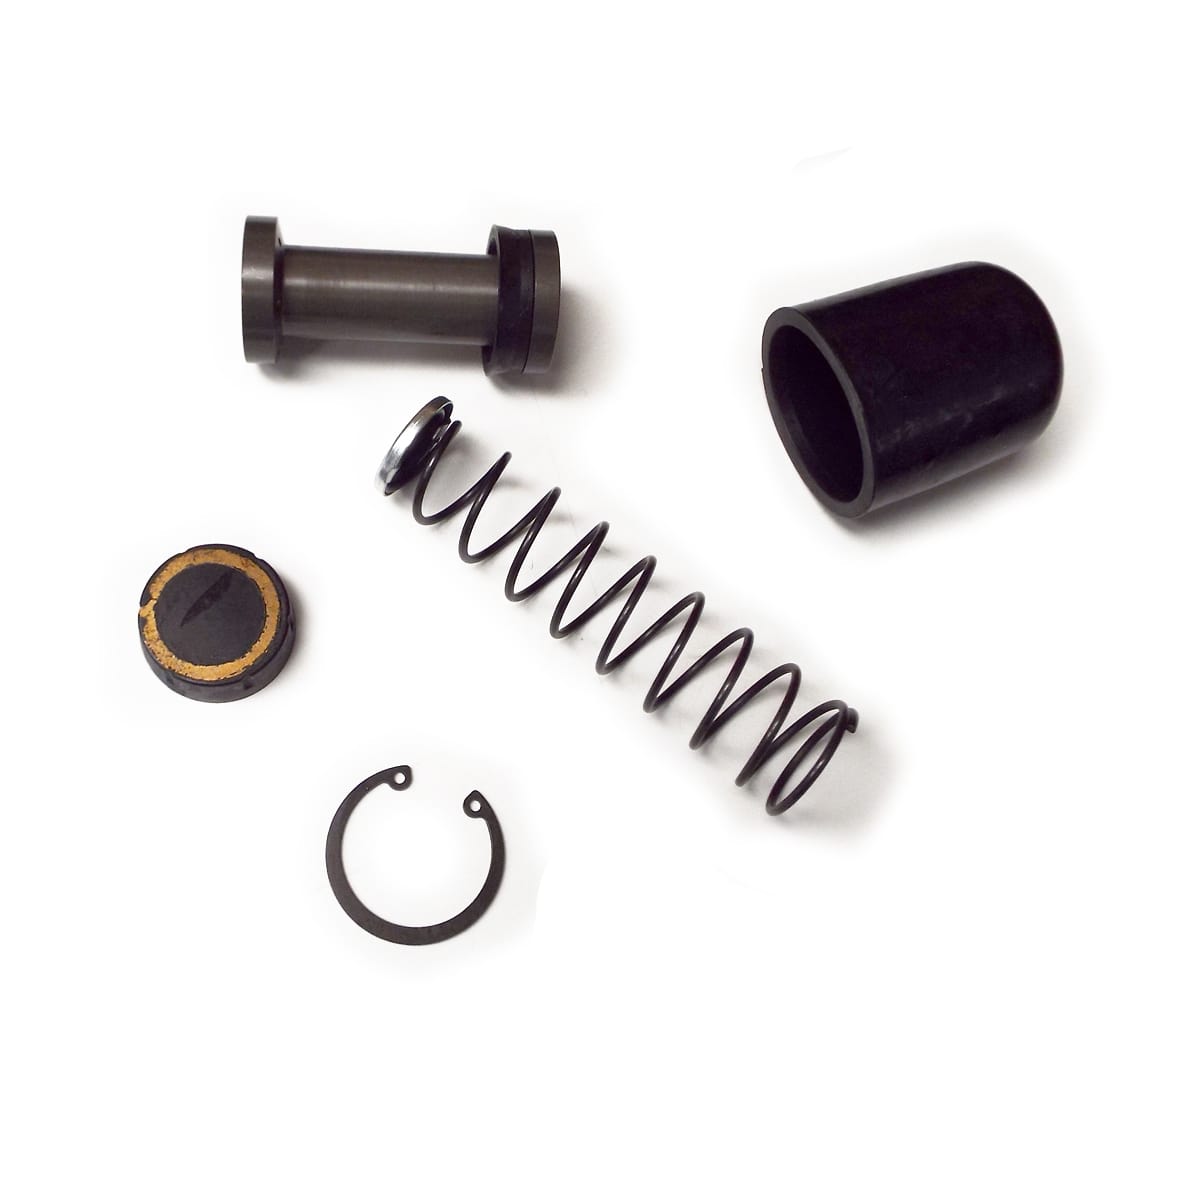 1960-1962 Clutch Master Cylinder Repair Kit 1/2-1 1/2T 1 1/8 Bore Chevrolet and GMC Pickup Truck